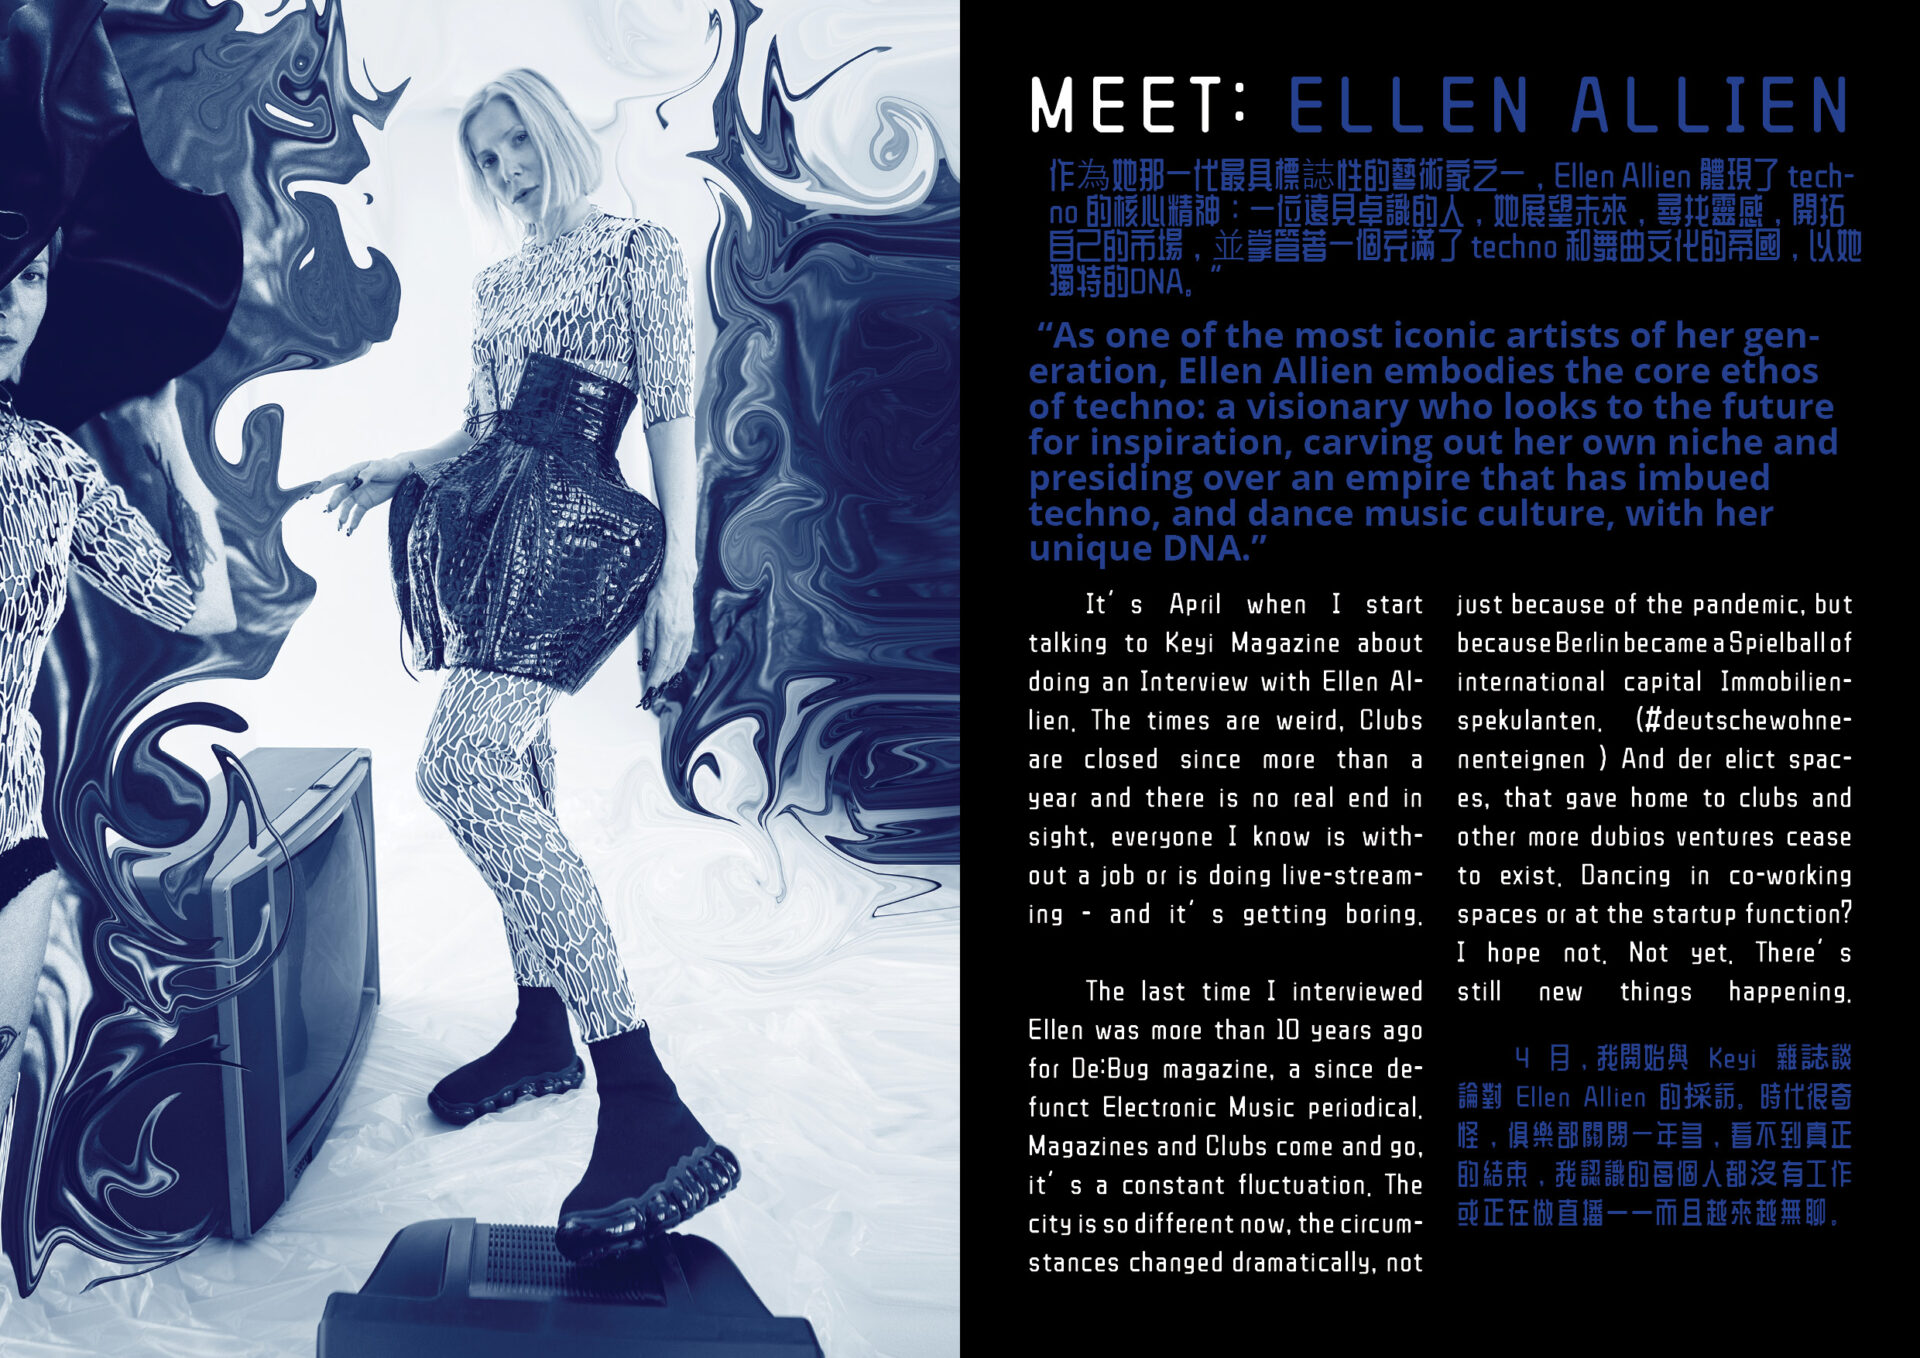 MEET:ELLEN ALLIEN interview by Micheal Aniser and photos / styling / set design by KEYI STUDIO. Hair by Attila Kenyeres. Make up by Leana Ardeleanu. Nails by Thams.